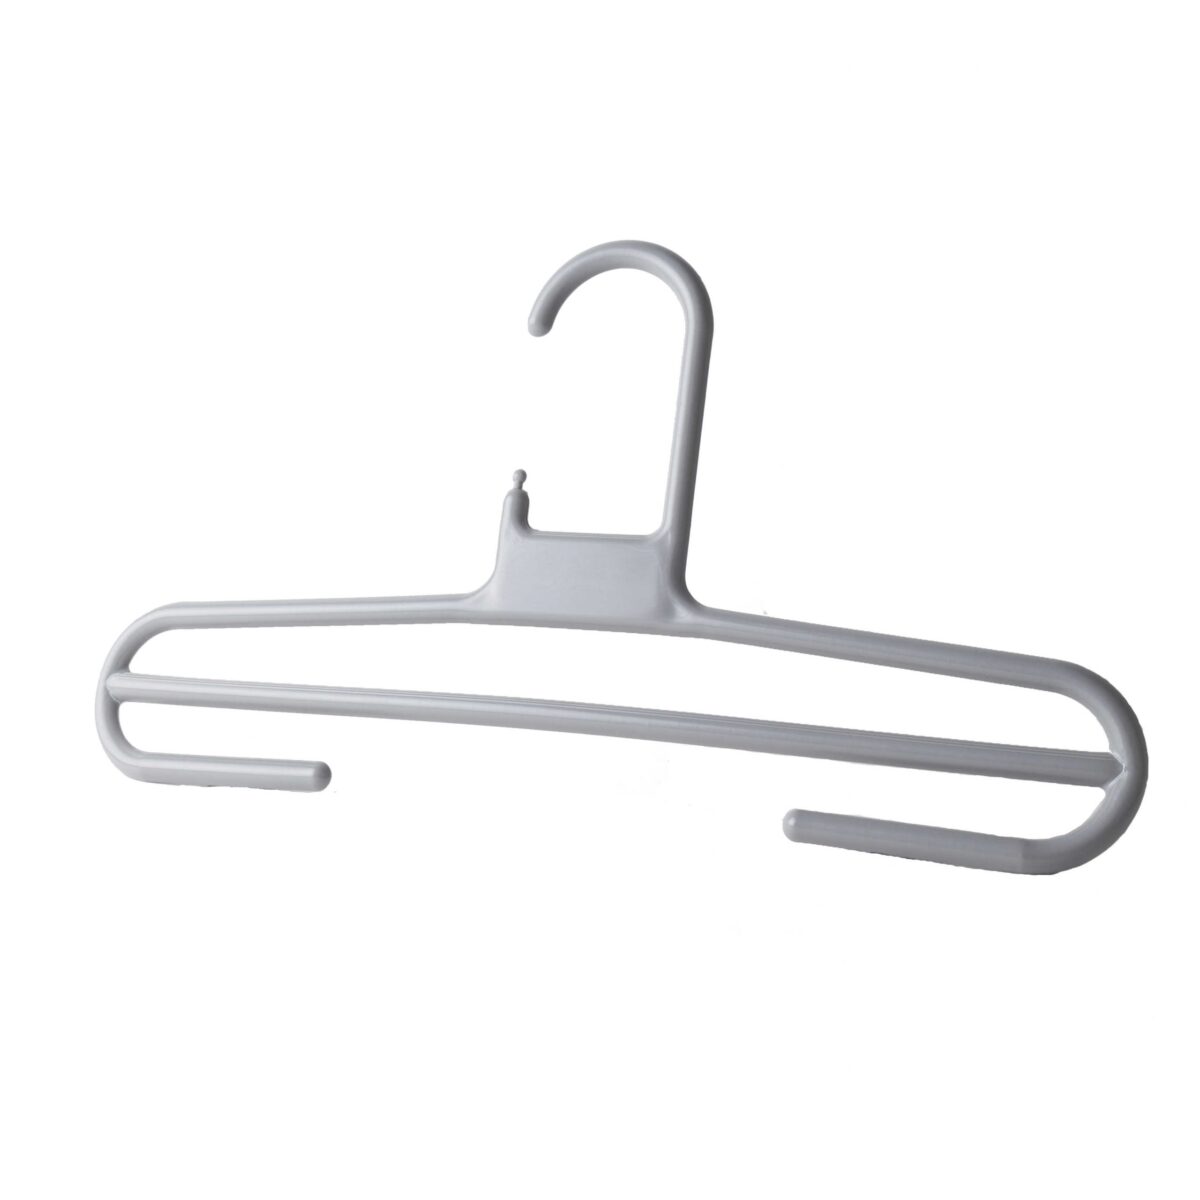 Rounded Plastic Trouser Hangers | Different Colours